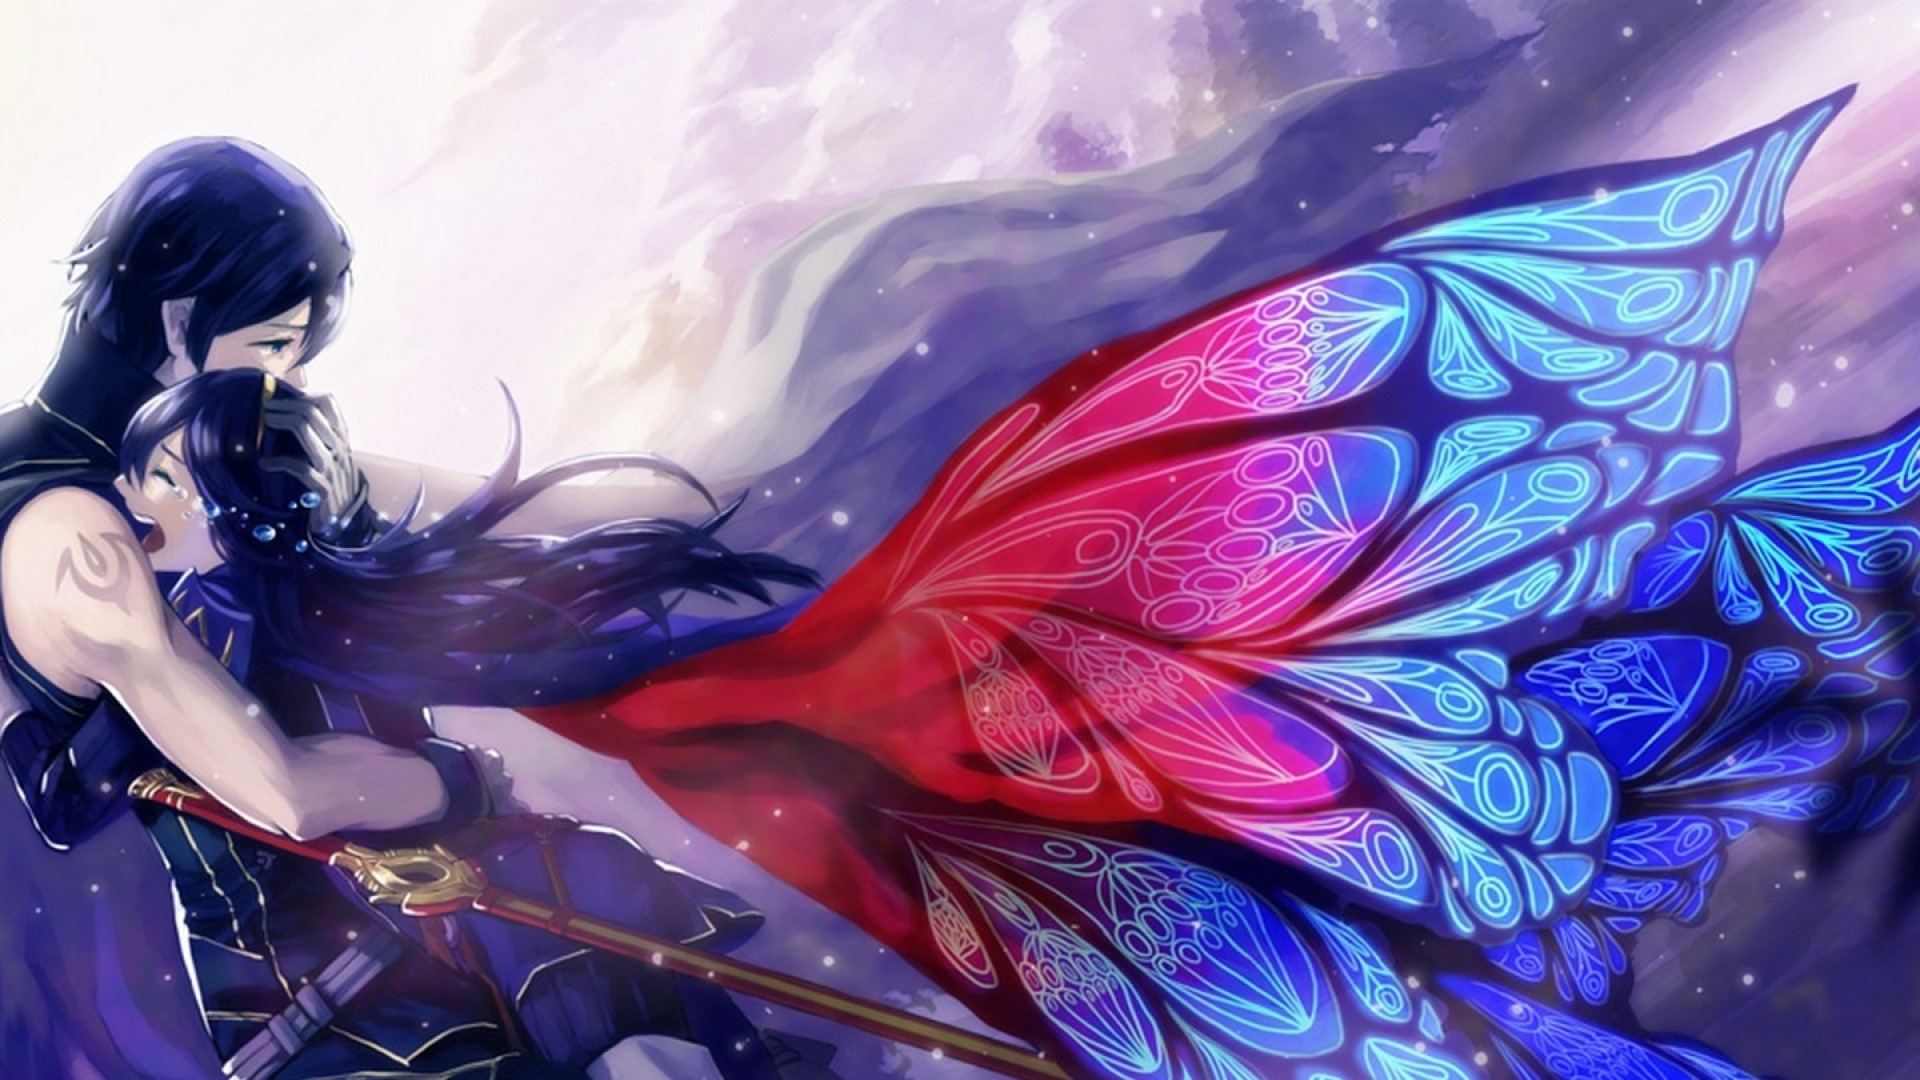 Download wallpaper anime, full HD, wallpaper 1920x1080, section art in  resolution 480x272